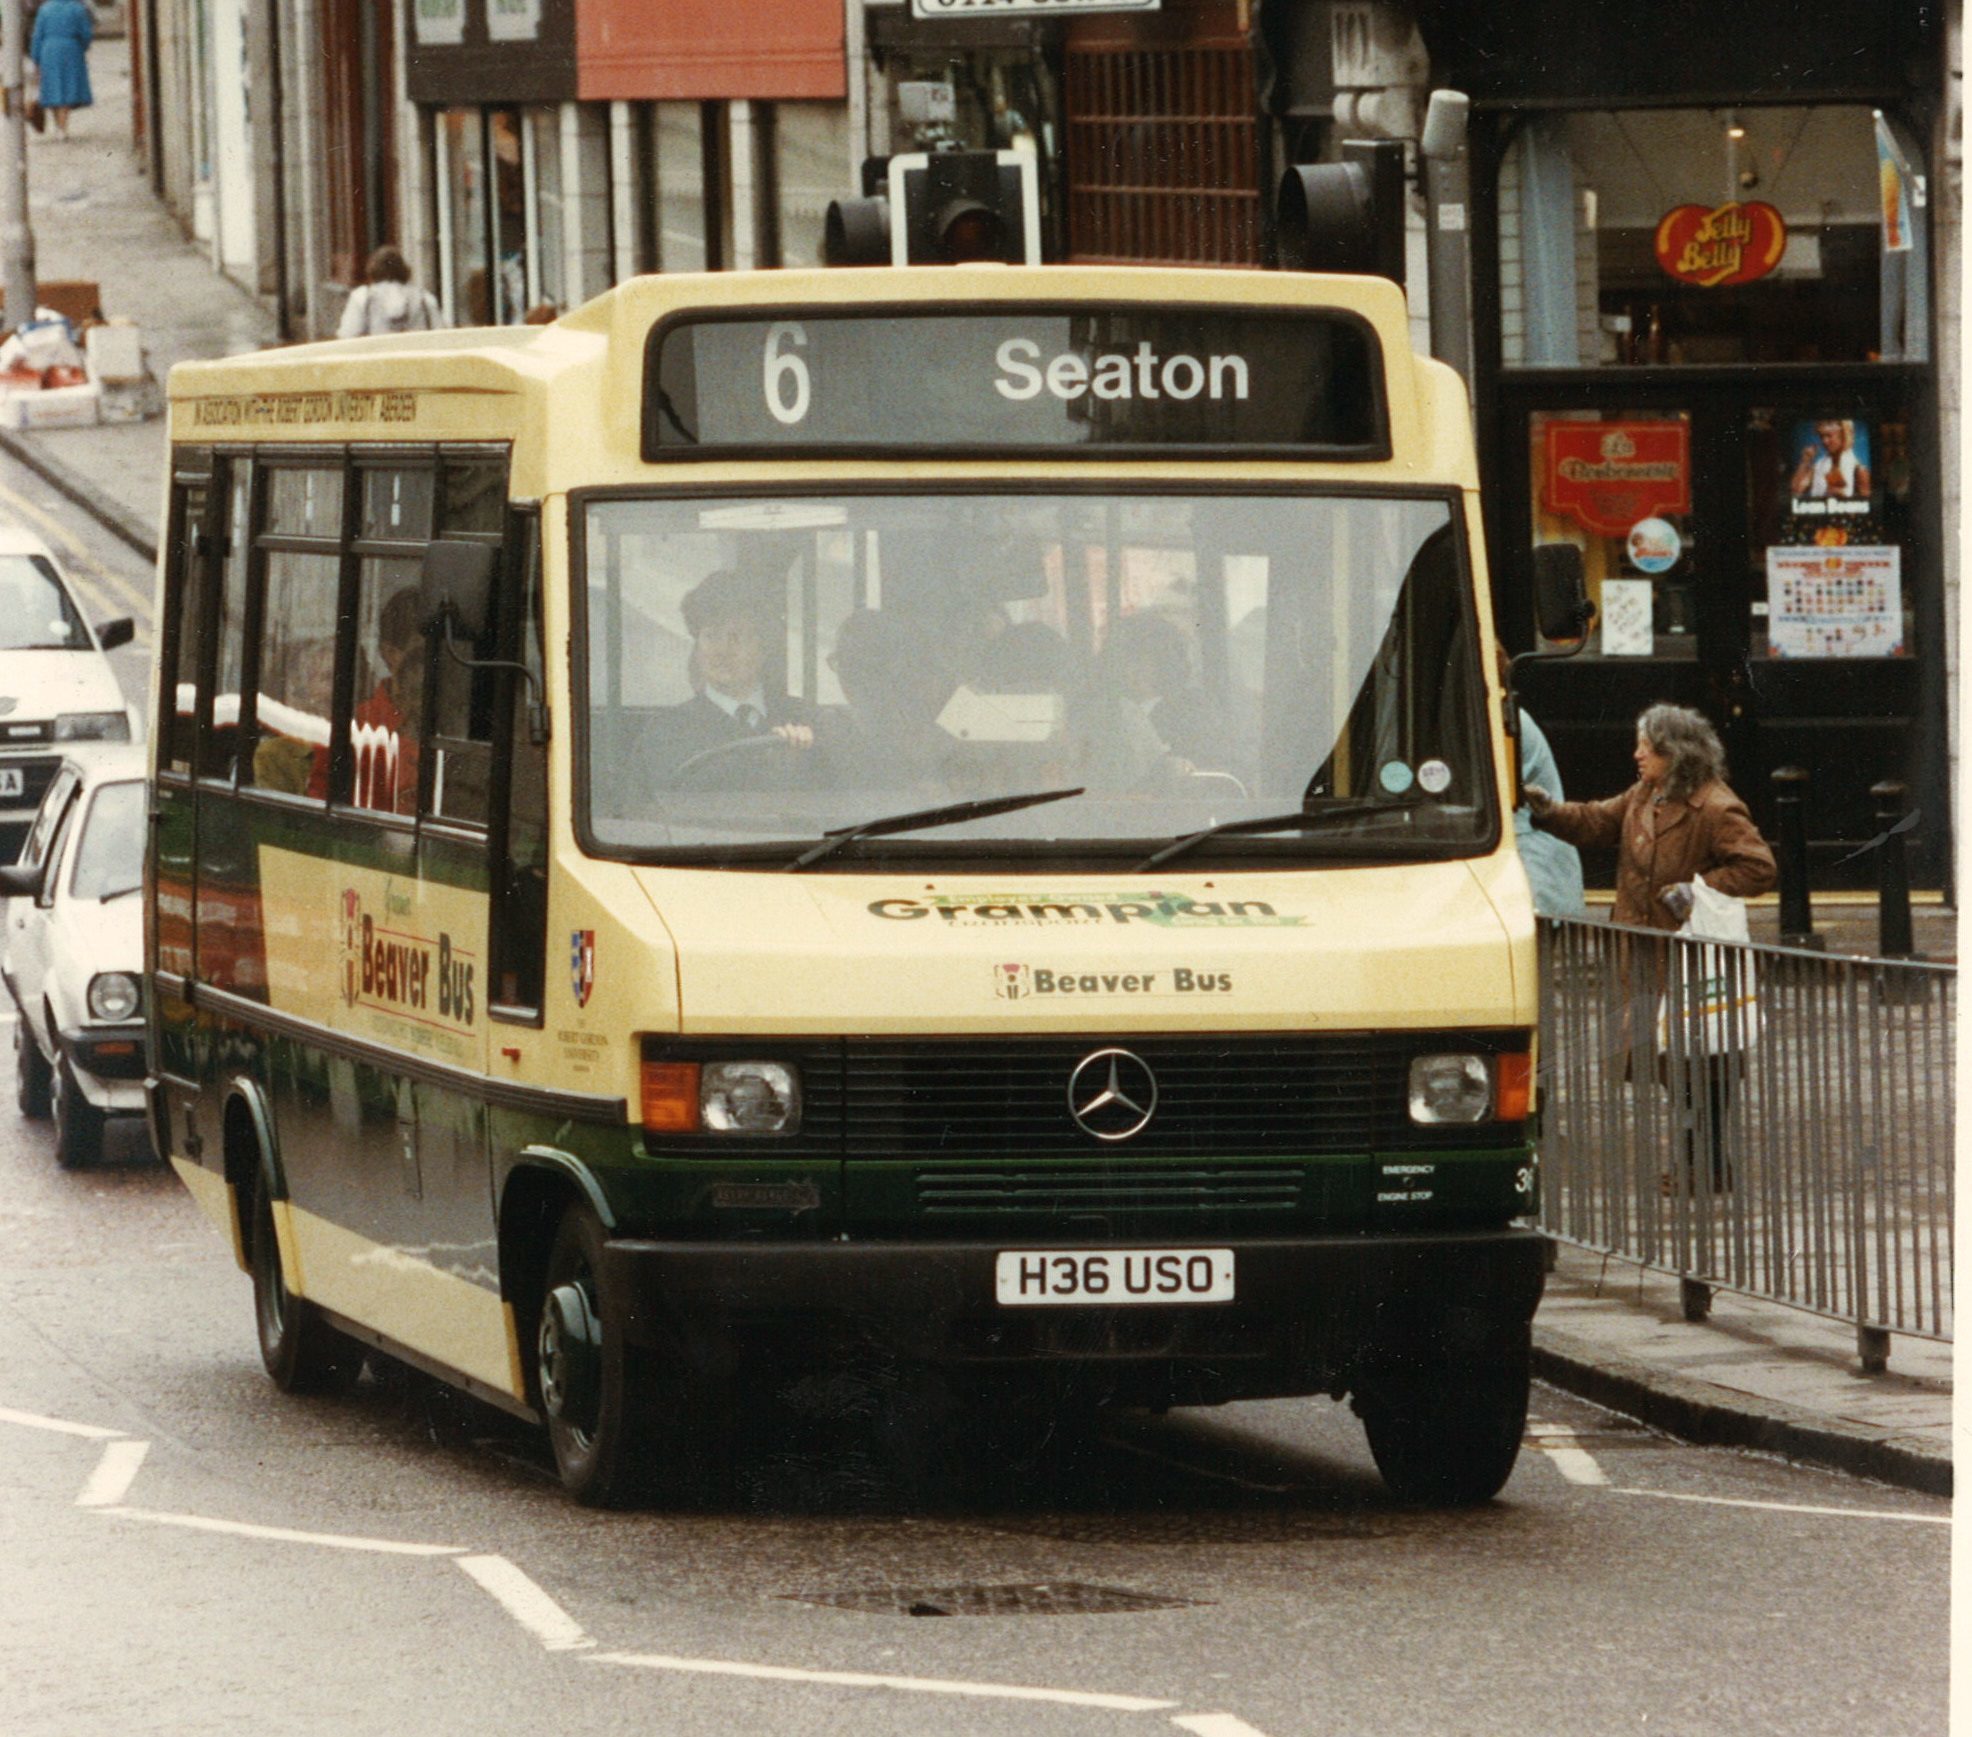 The city previously had Grampian buses